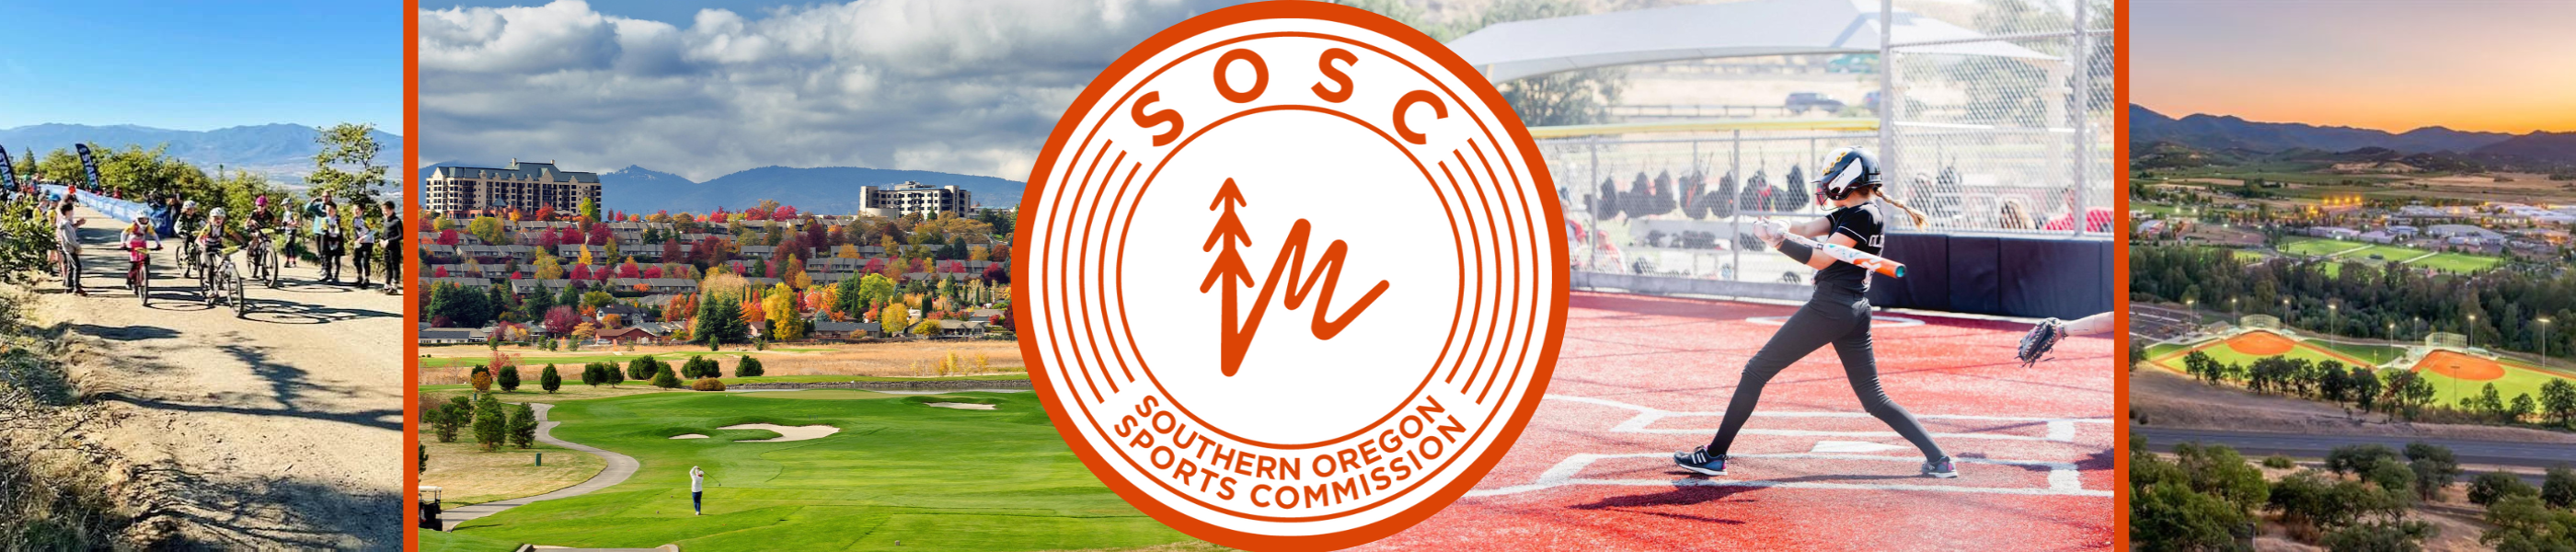 southern oregon sports commission, sosc, sports banner, medford oregon, heart of the rogue